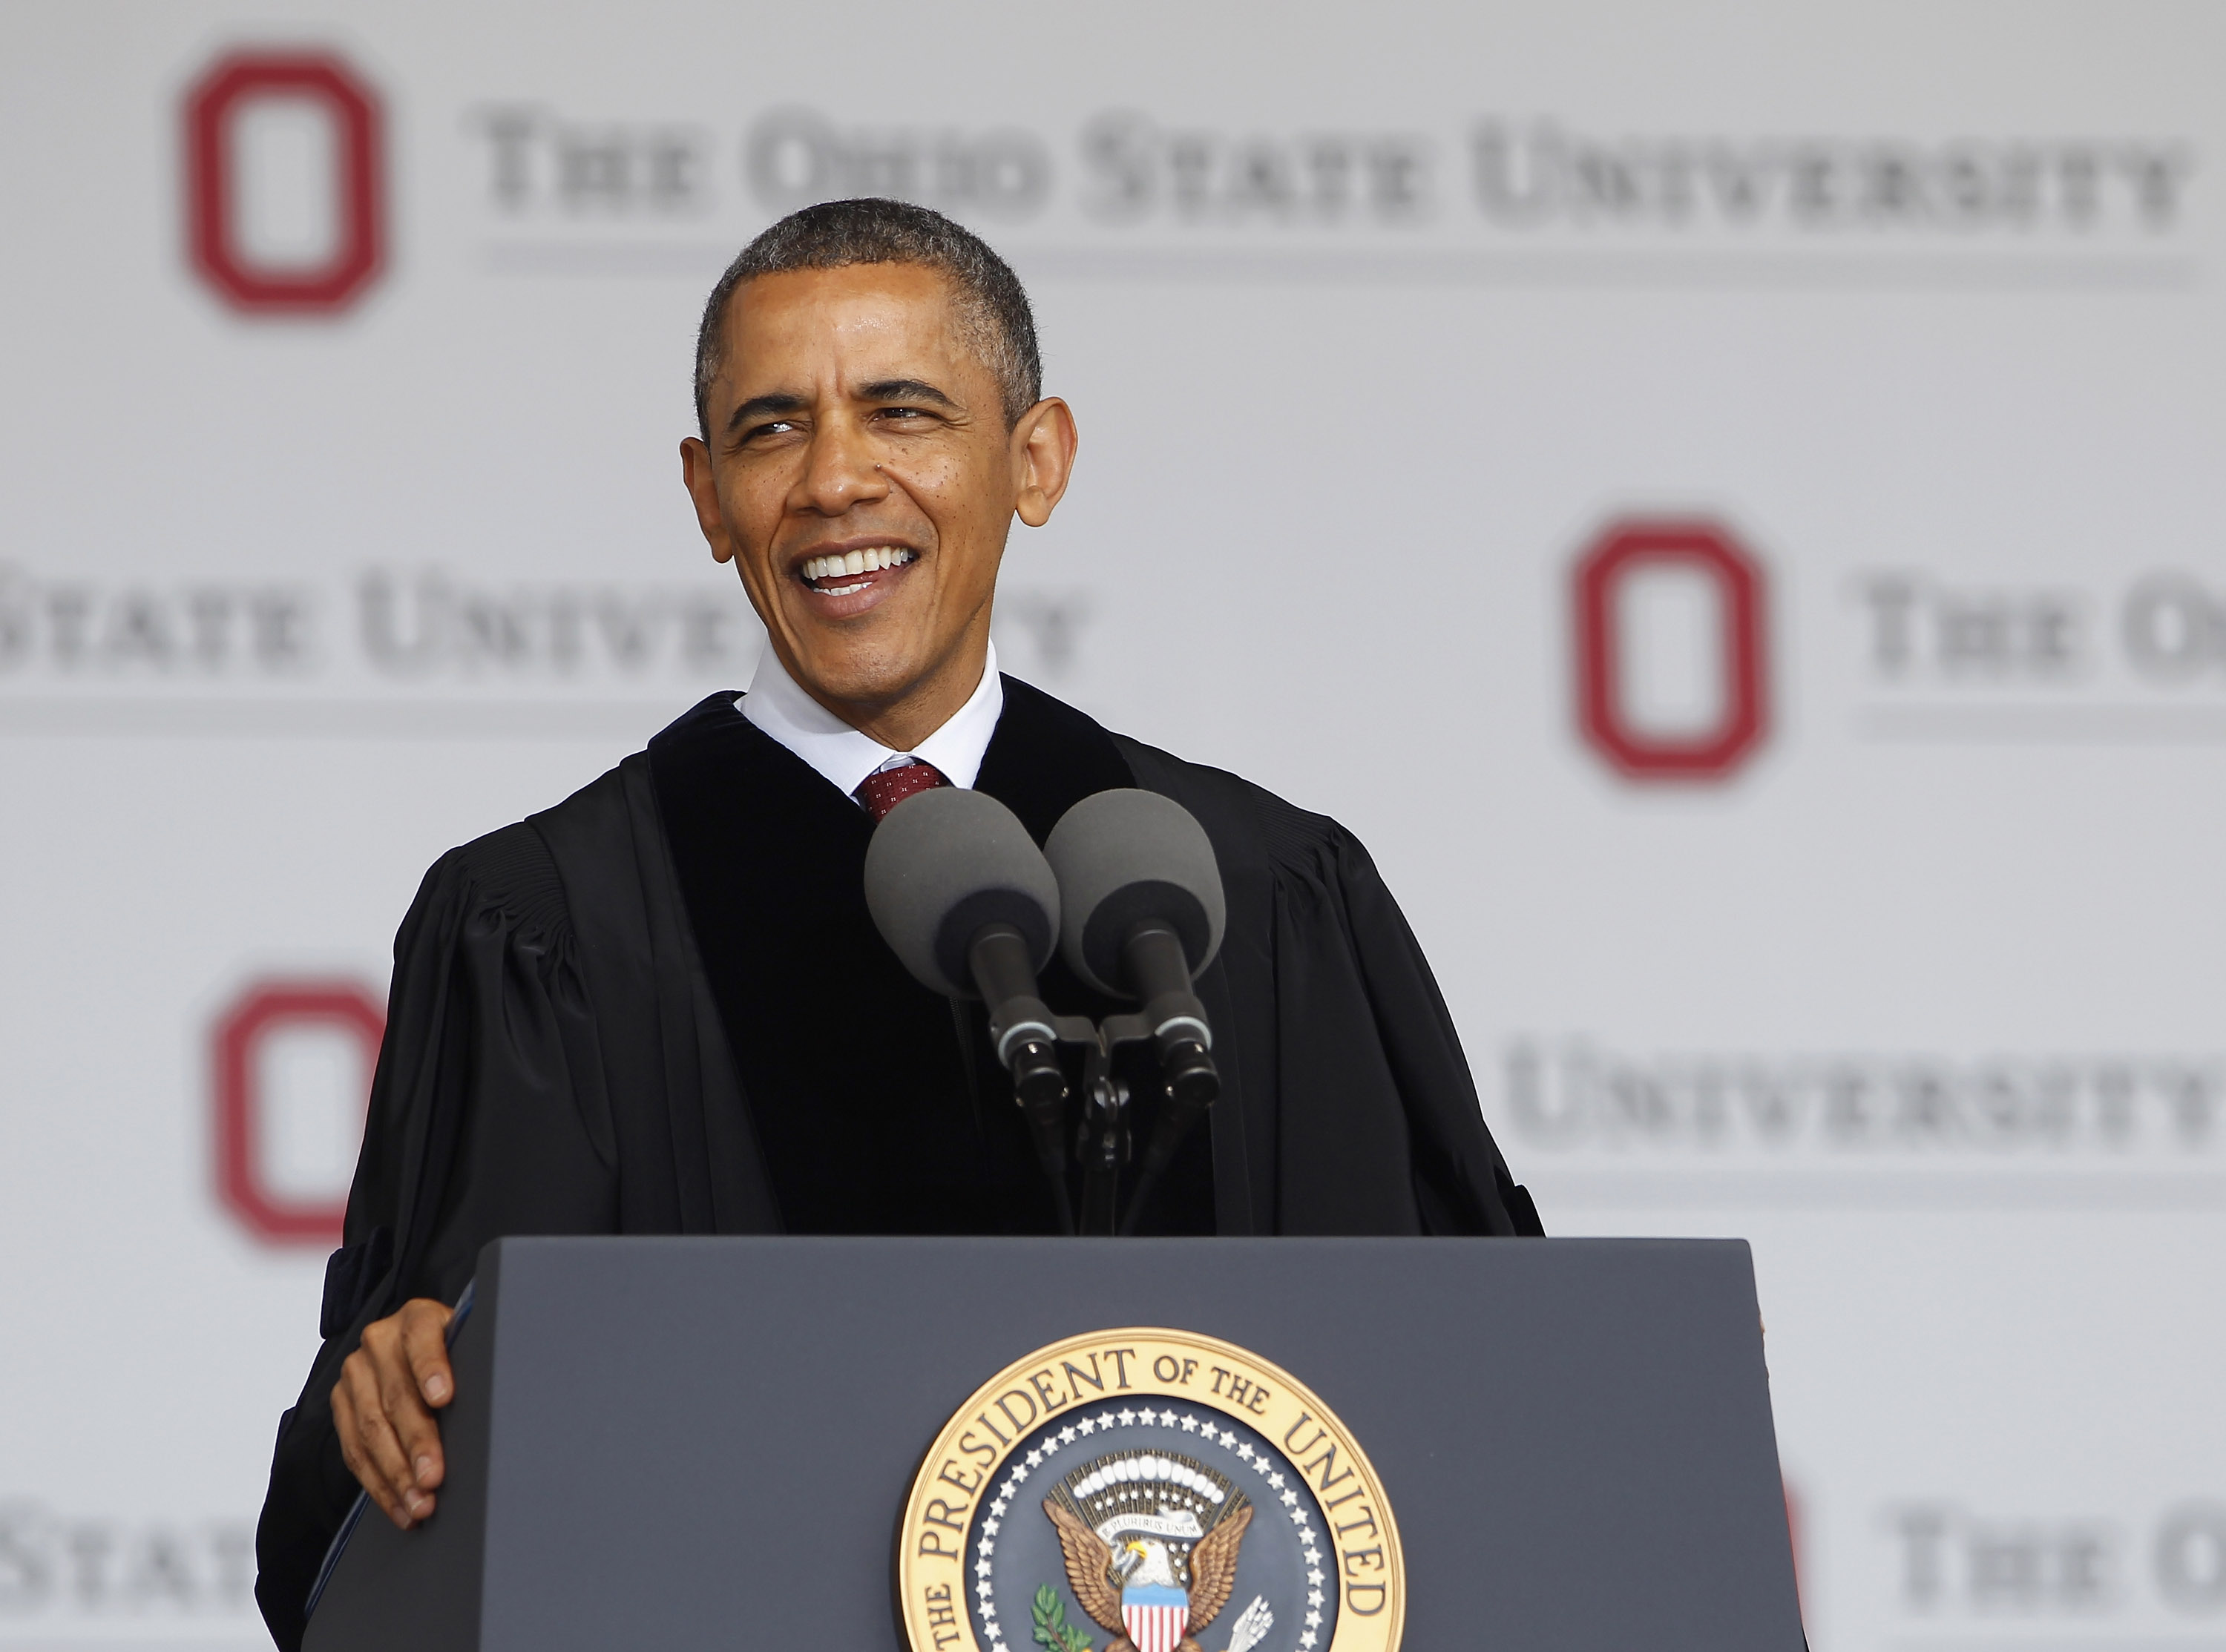 President Barack Obama gives the commencement address to the graduating class of The Ohio State University on May 5, 2013 in Columbus, Ohio. (Matt Sullivan—Getty Images)